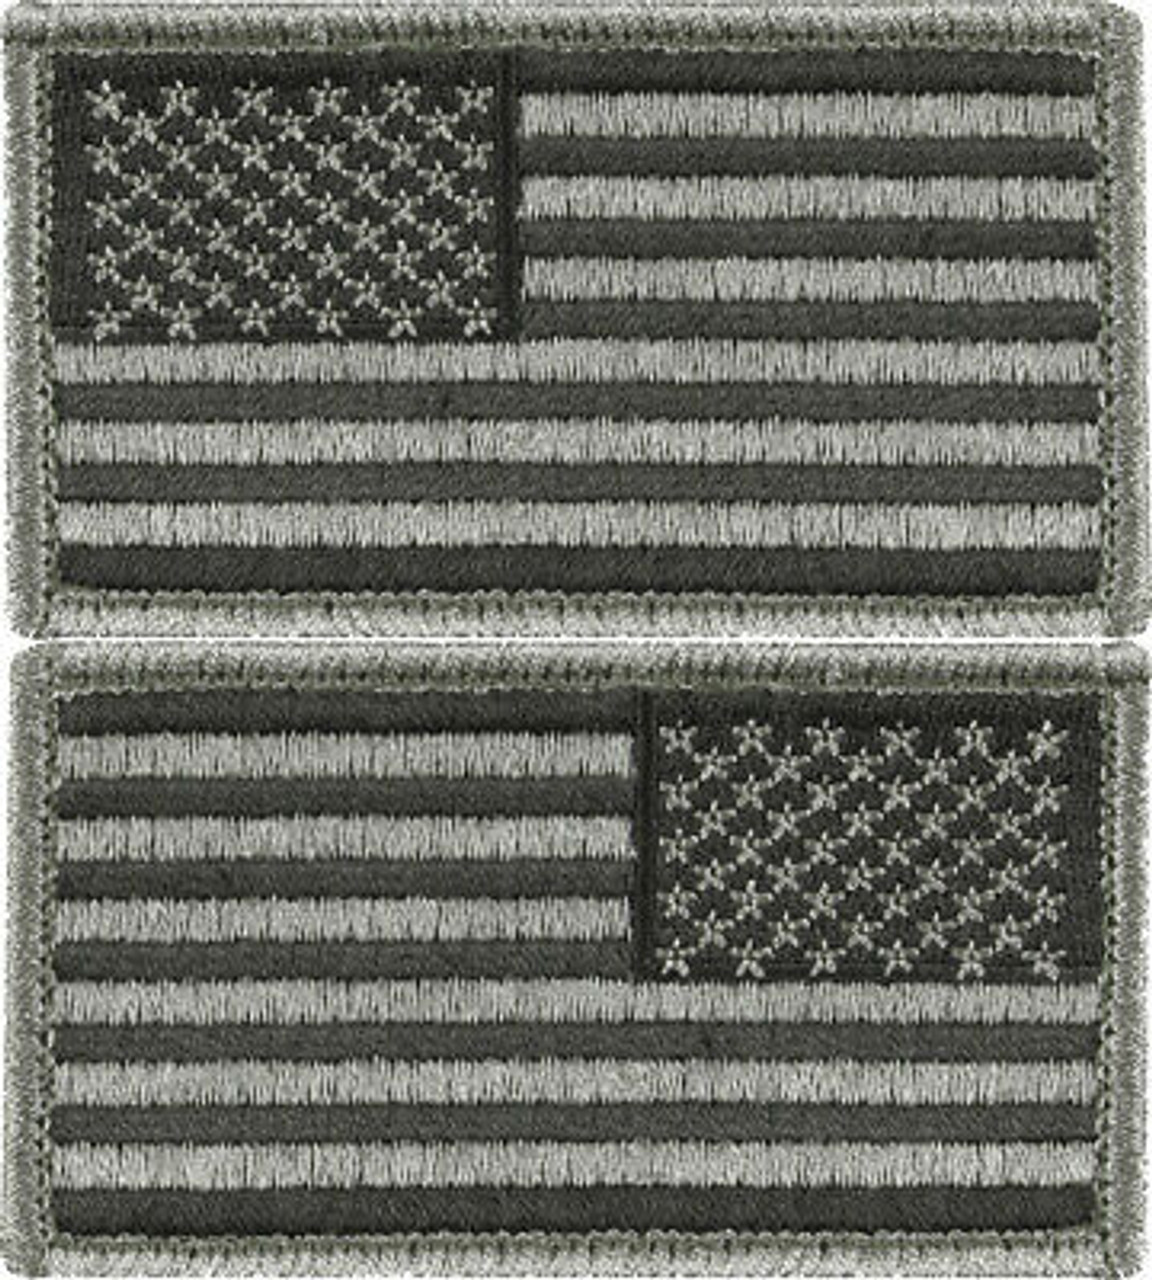 Silver & Black PVC US Flag Patch Military American Flag Patch